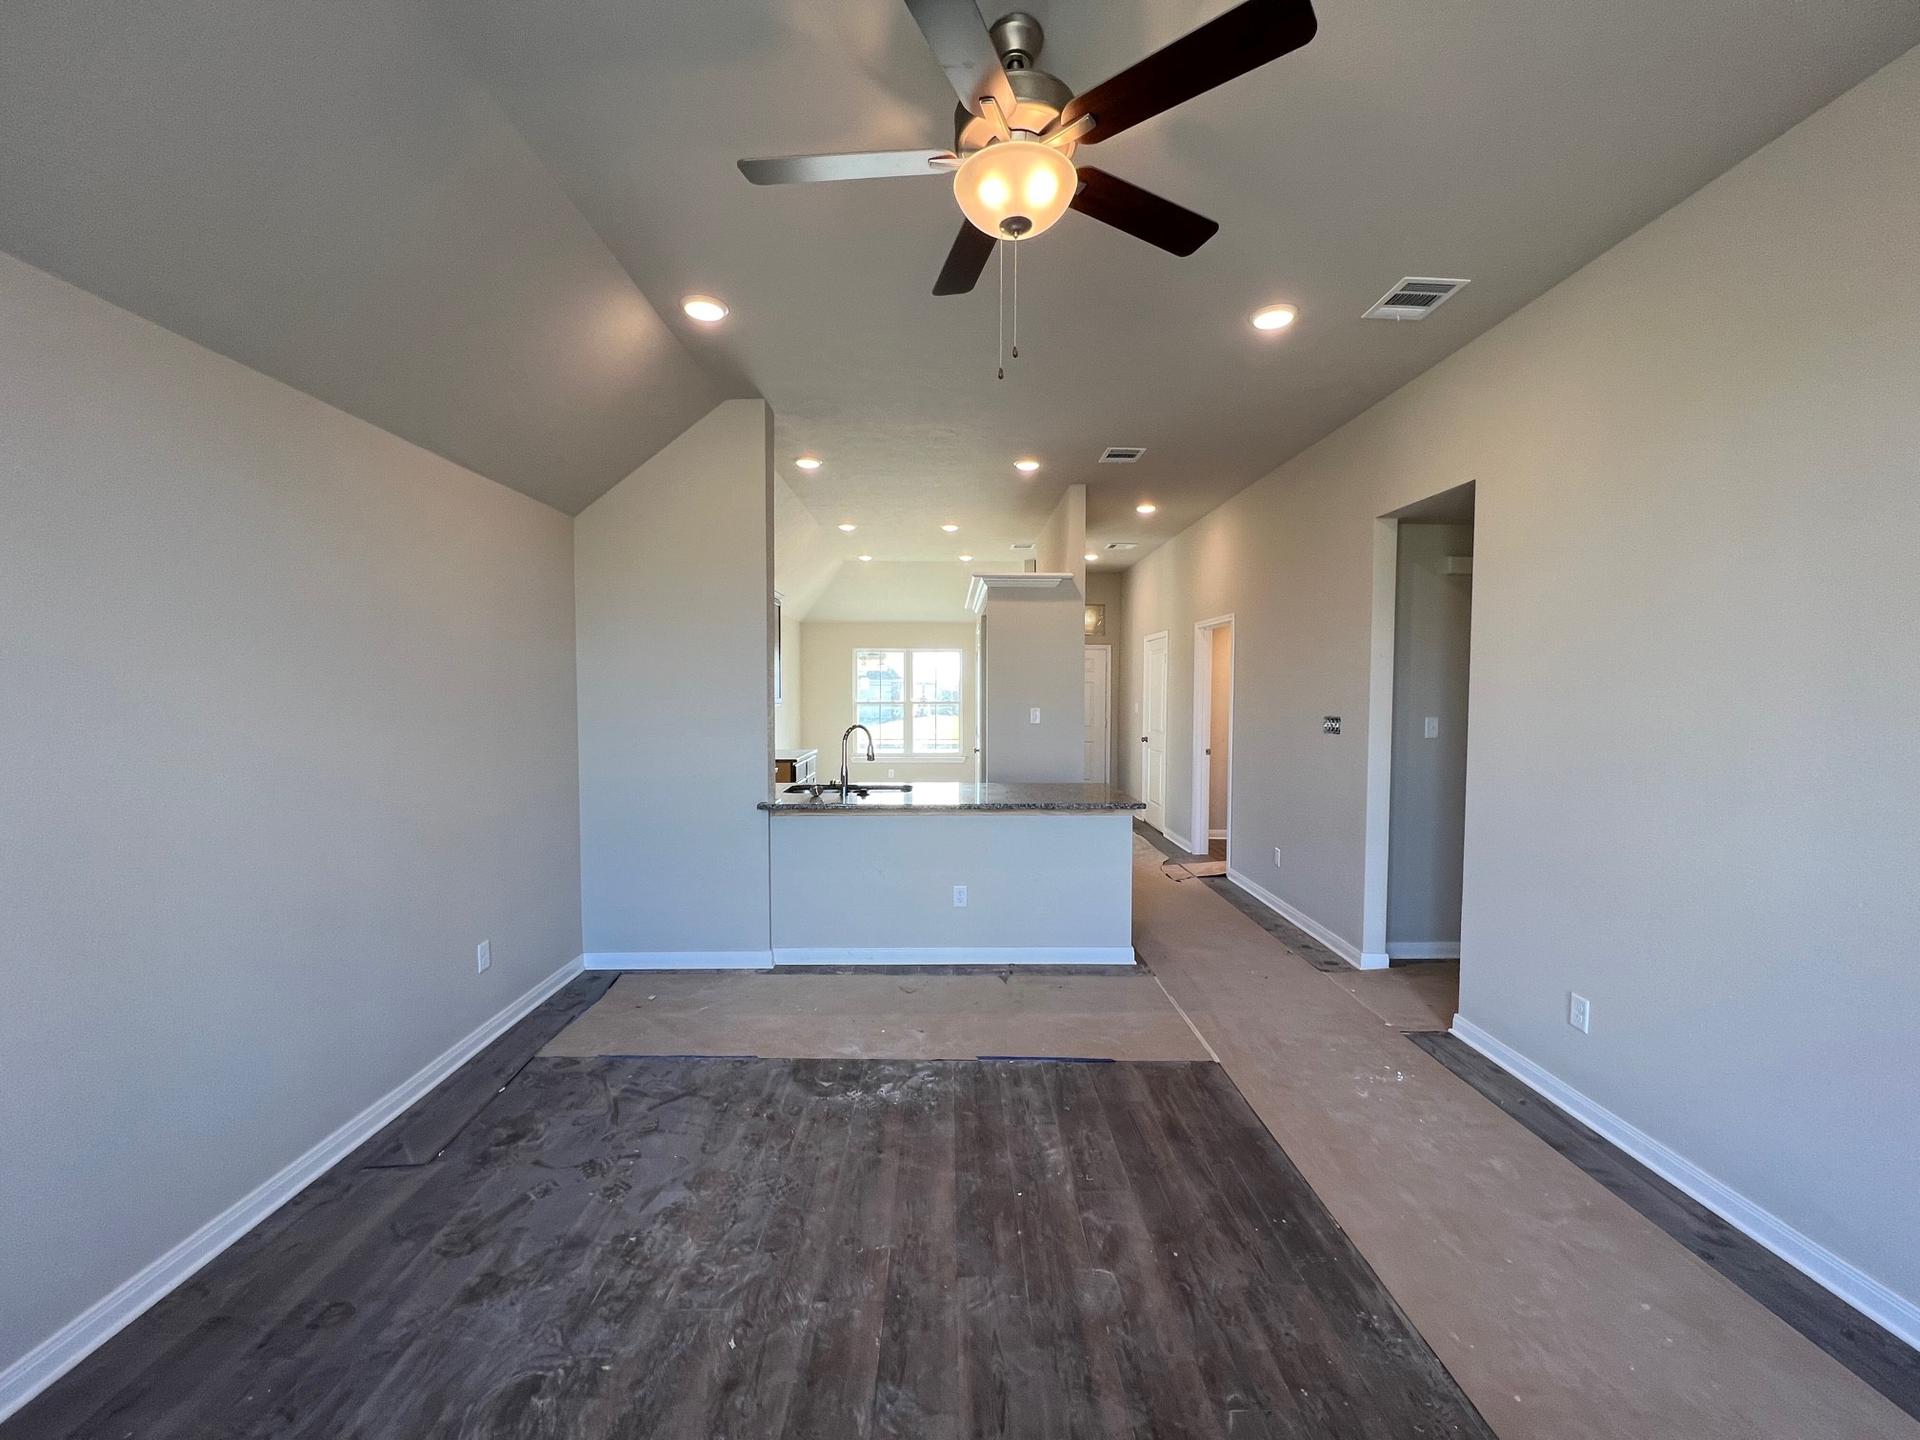 3br New Home in Bryan, TX